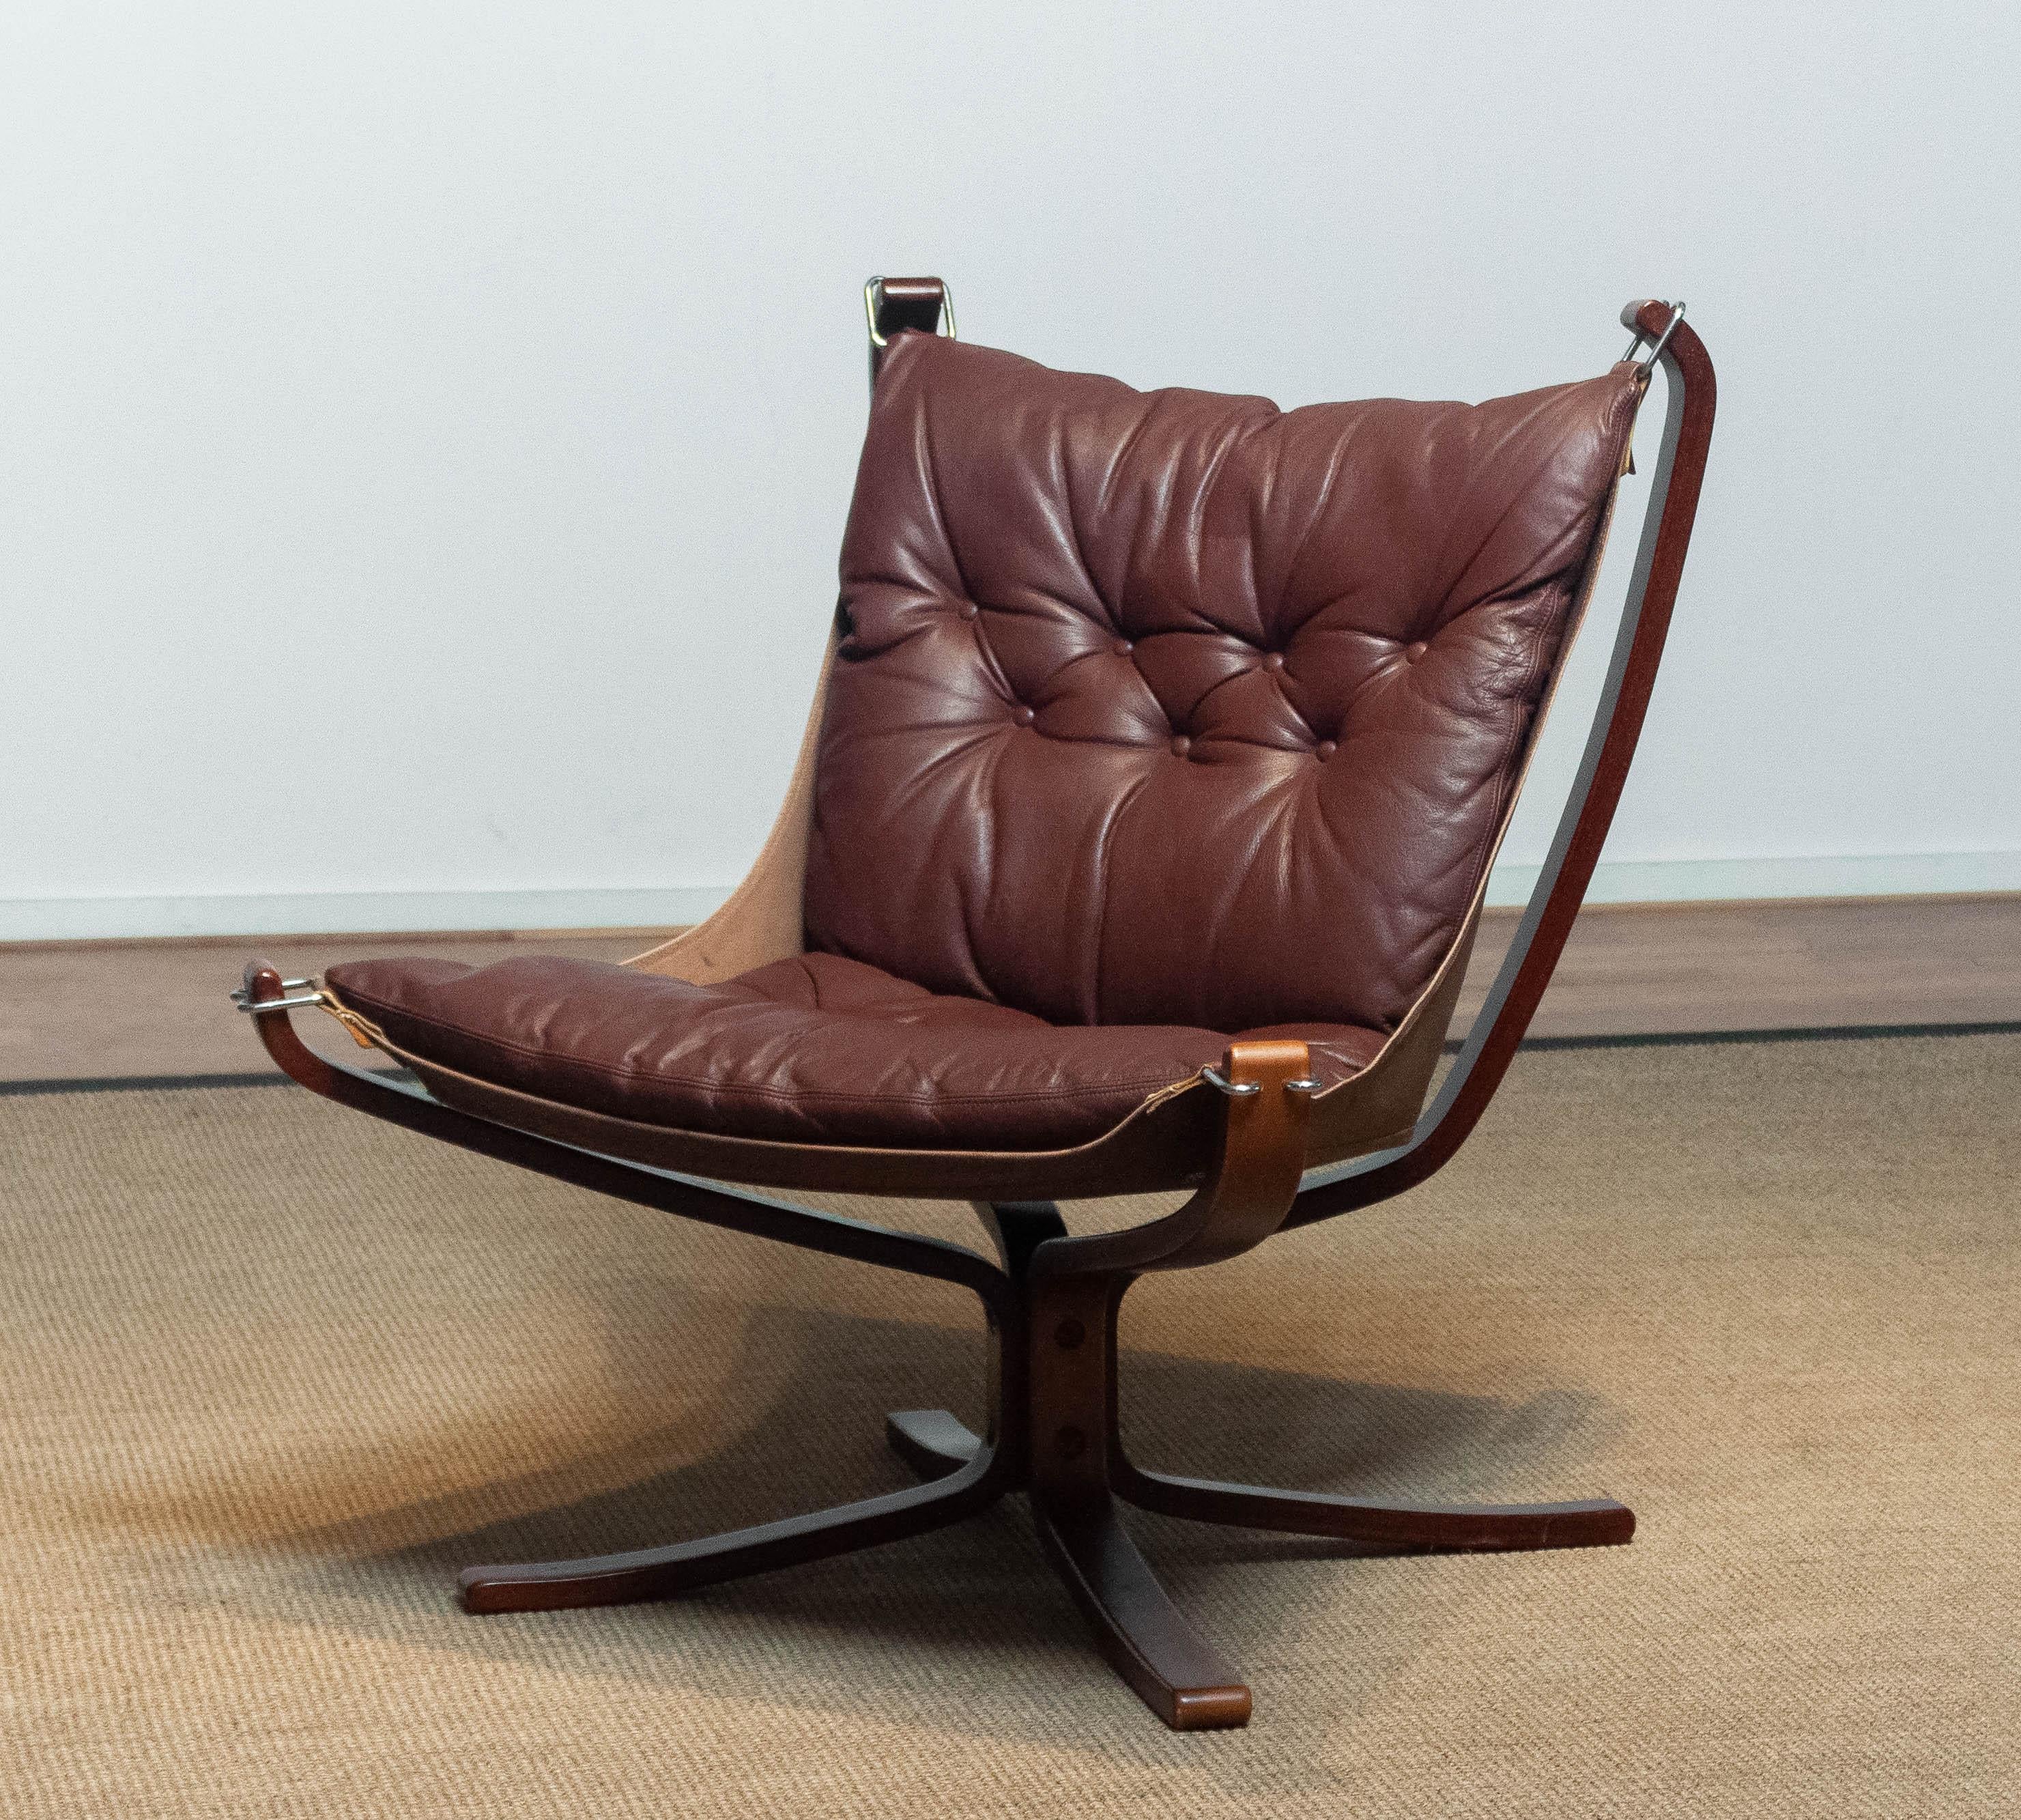 Dark brown / chocolate brown leather 'Falcon' lounge / easy chair designed by Sigurd Resell for Vatne Mobler in Normay.
( Low back model )
The chair is in good and original condition.
 


